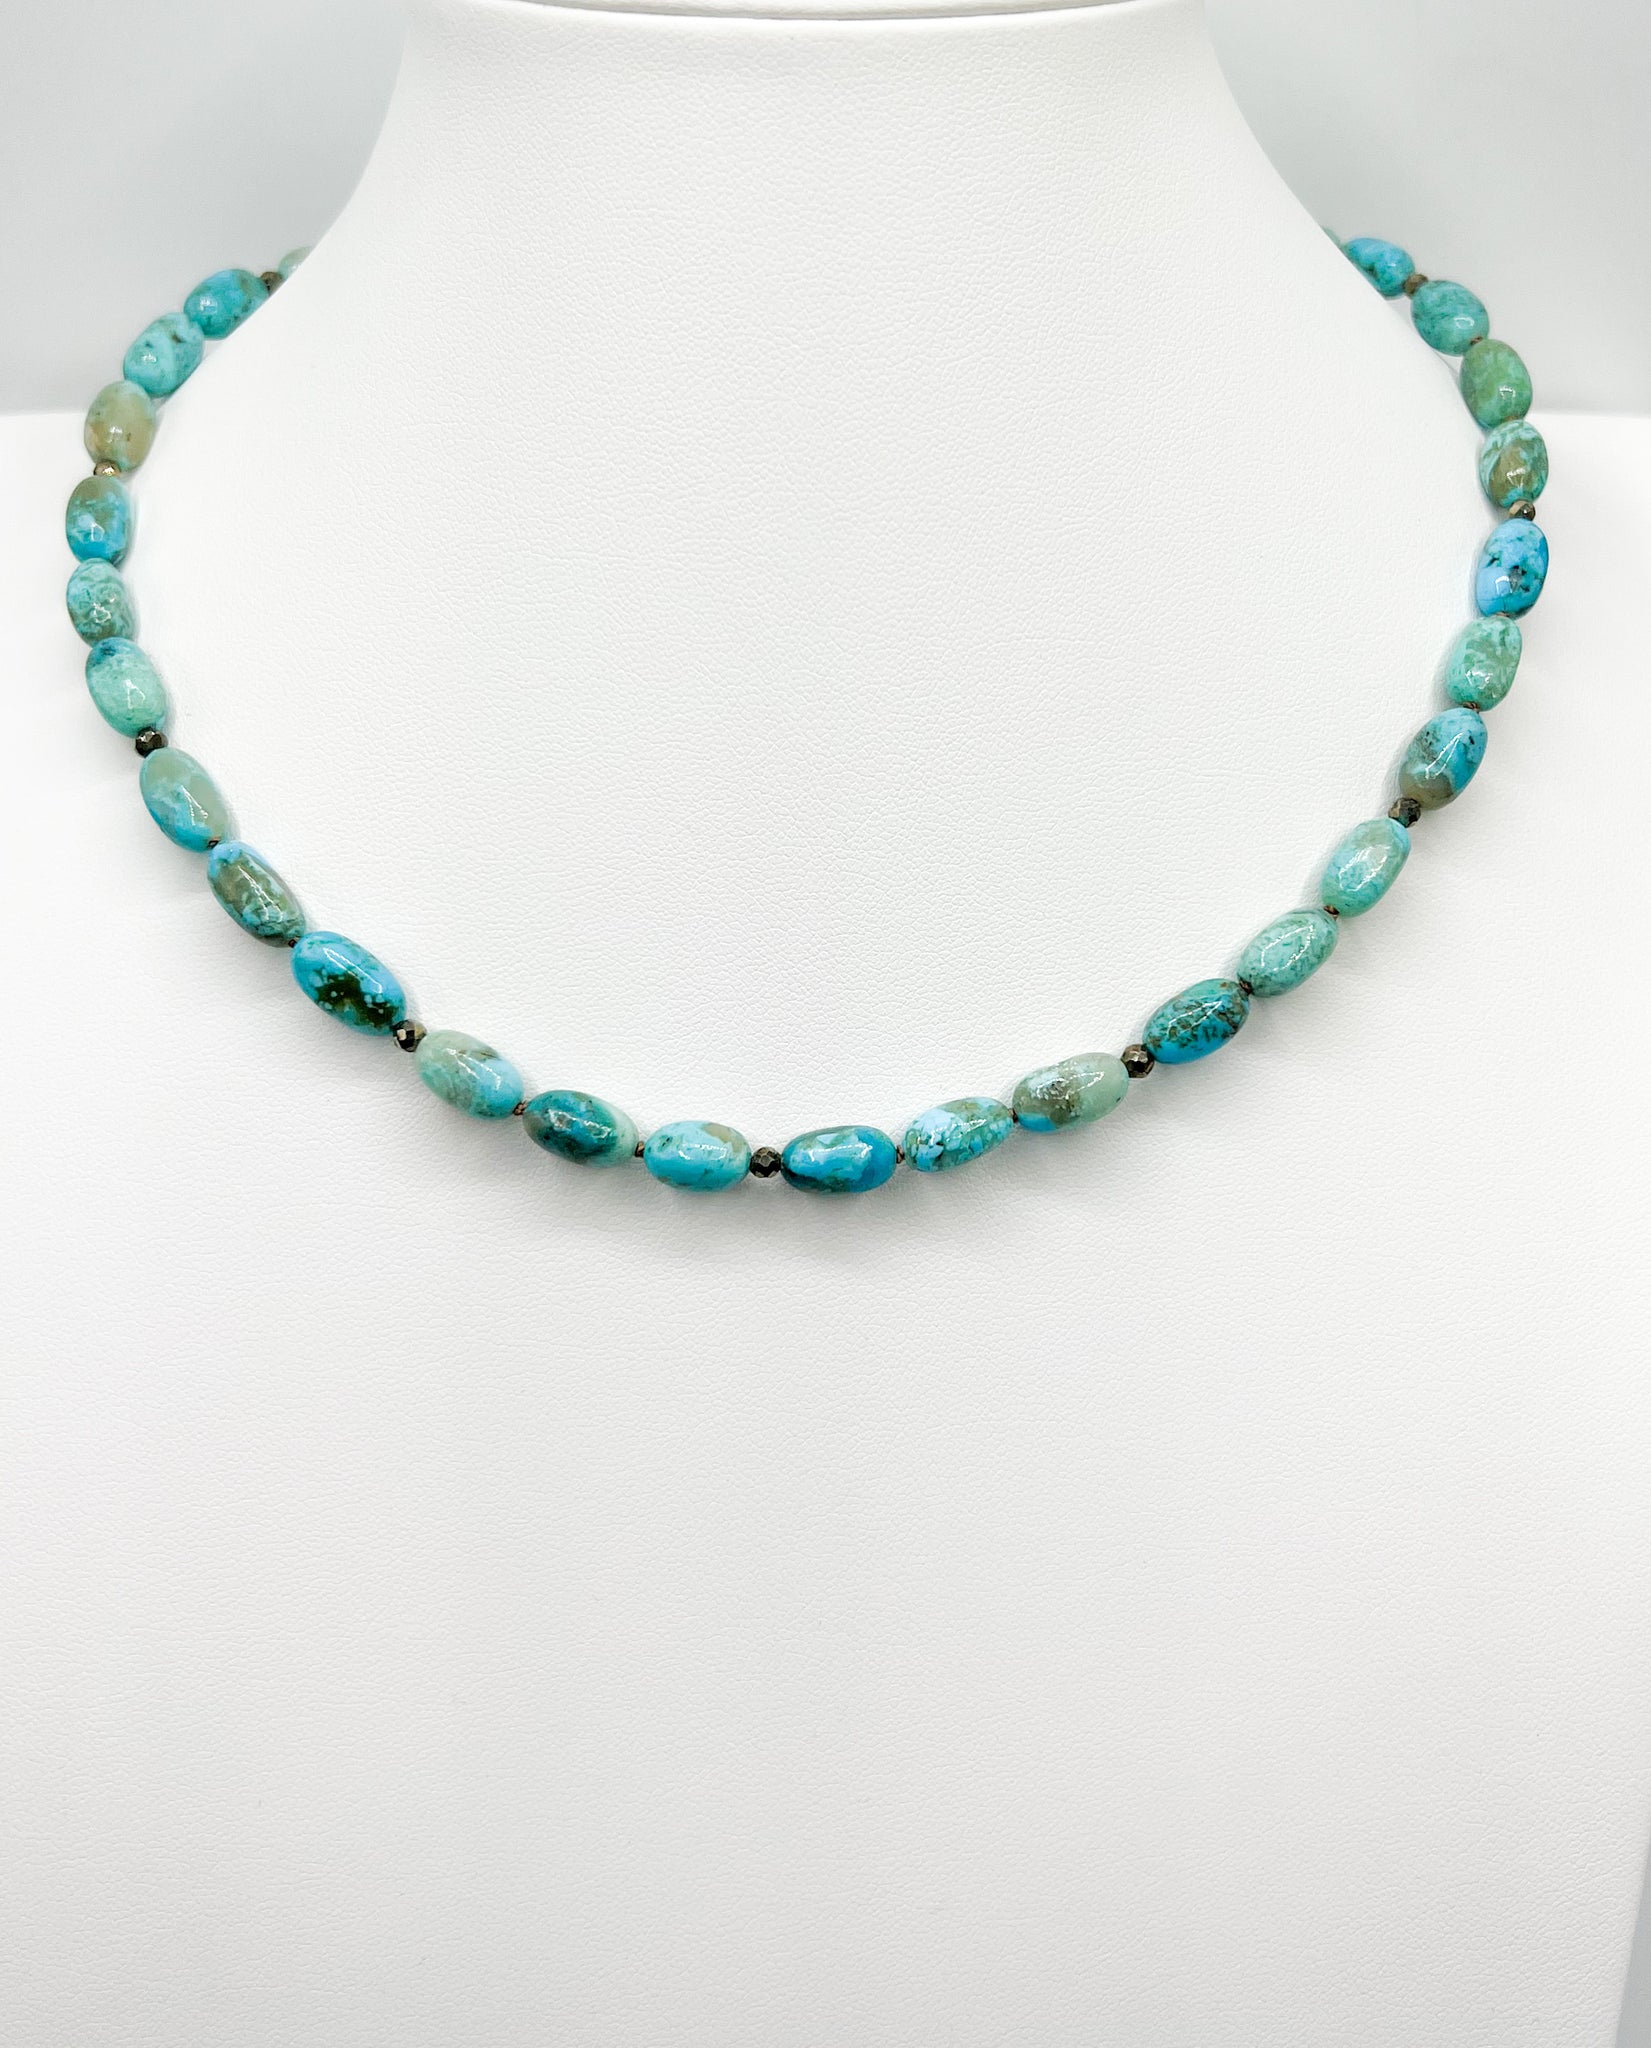 The Mohave Necklace